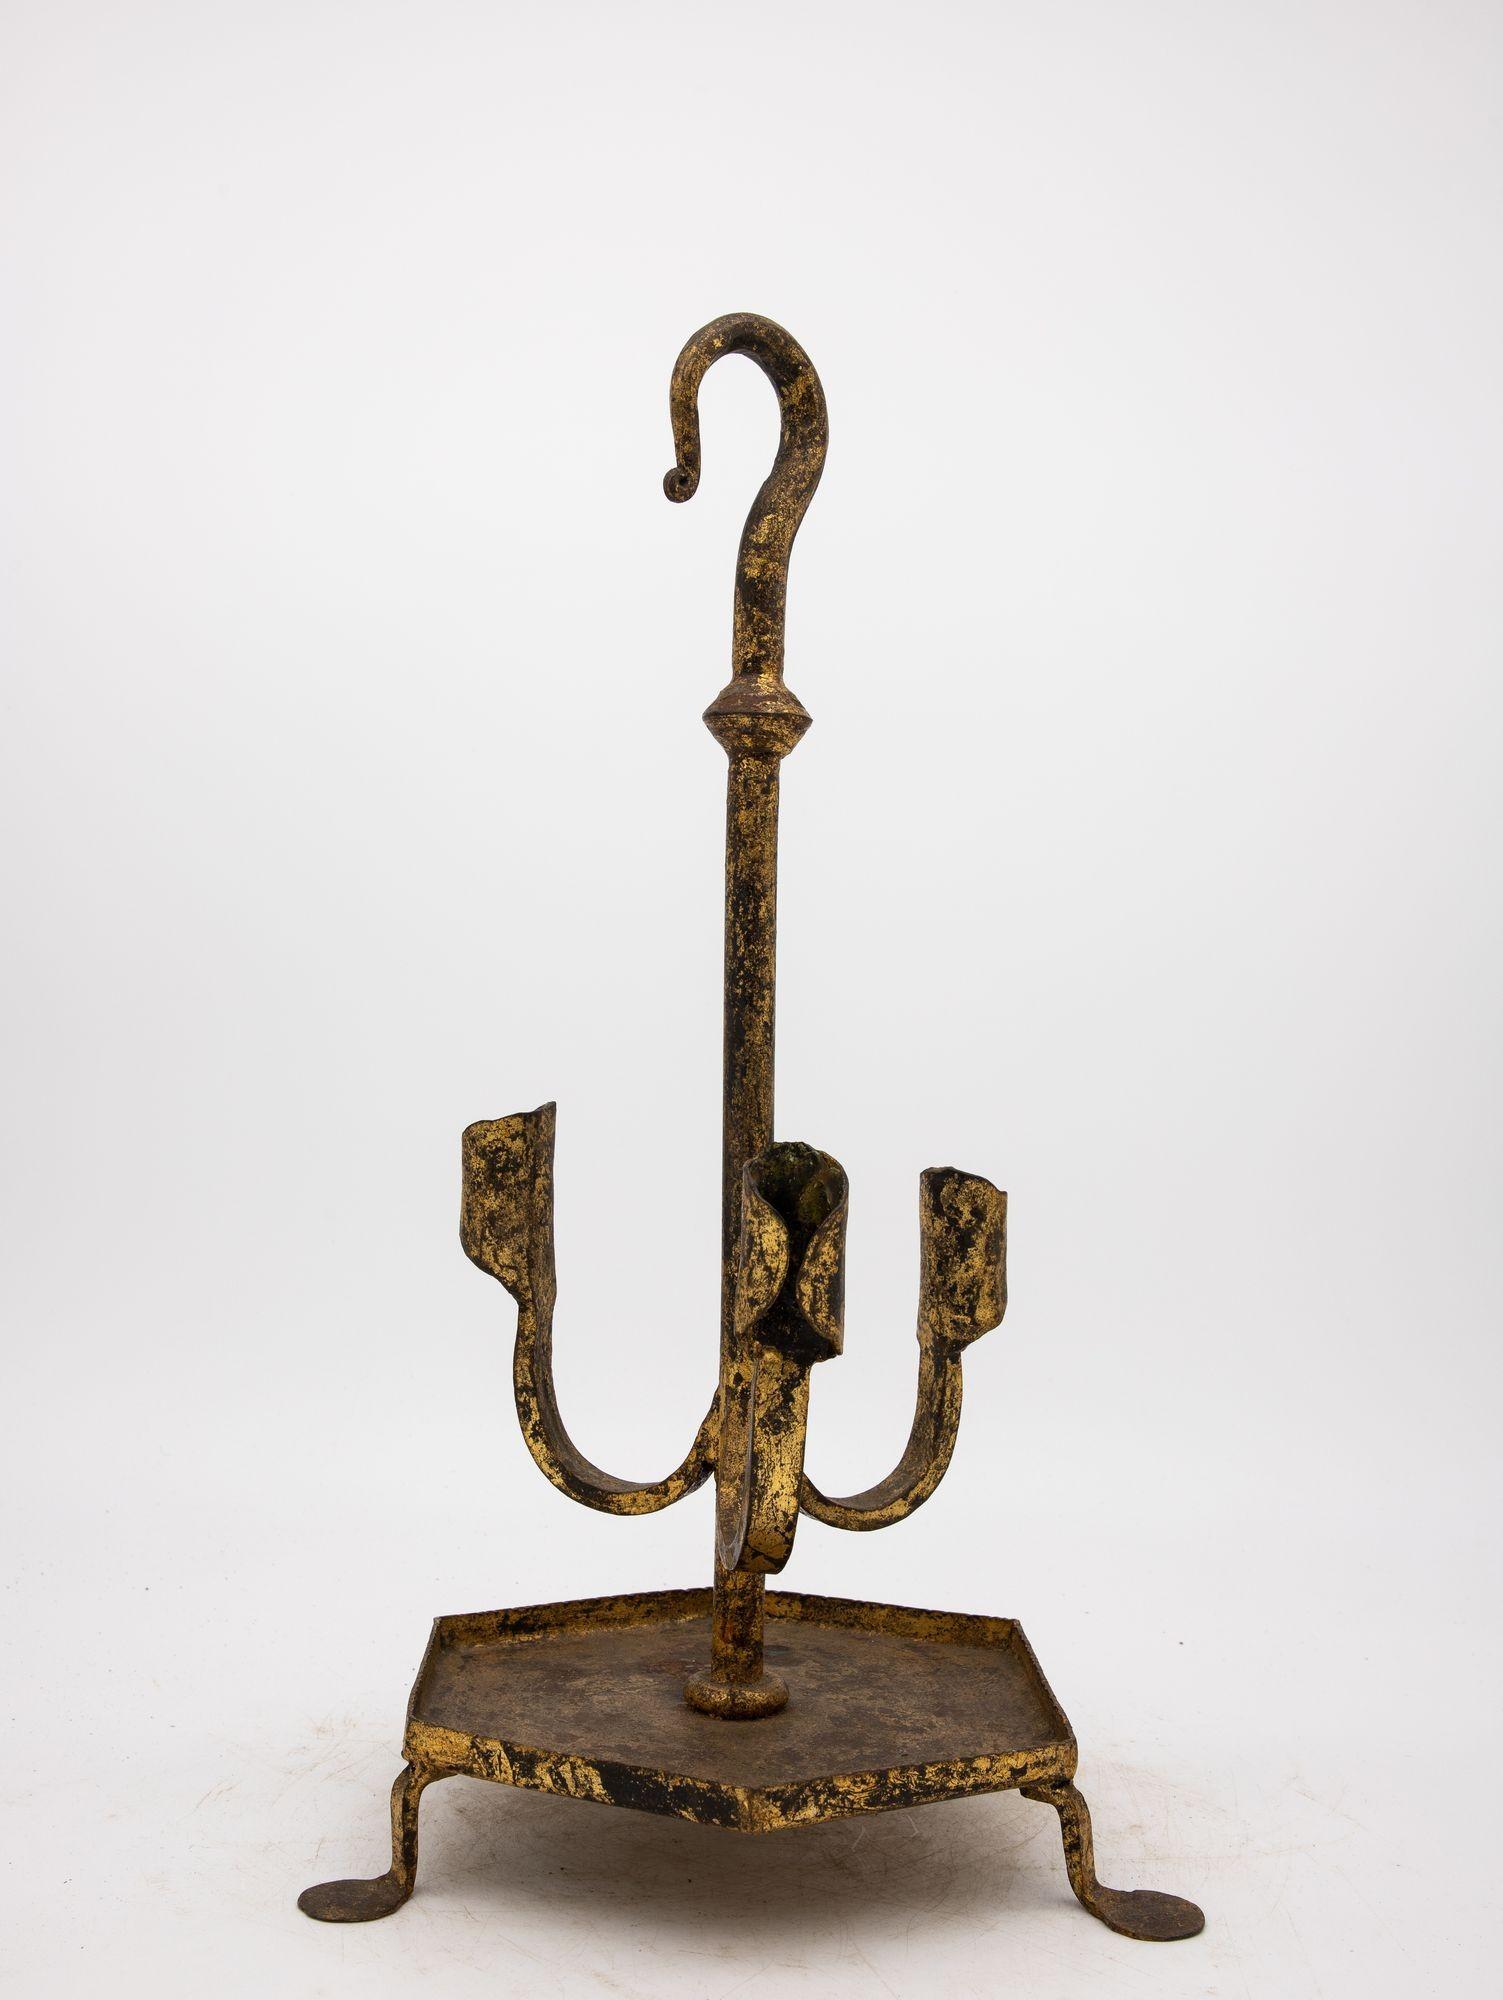 This enchanting 1950s Spanish gilt iron candlestick perfectly captures the tradition of ironwork Spain is known for. Its vintage allure exudes timeless beauty and sophistication. Crafted with meticulous attention to detail, the stand features three